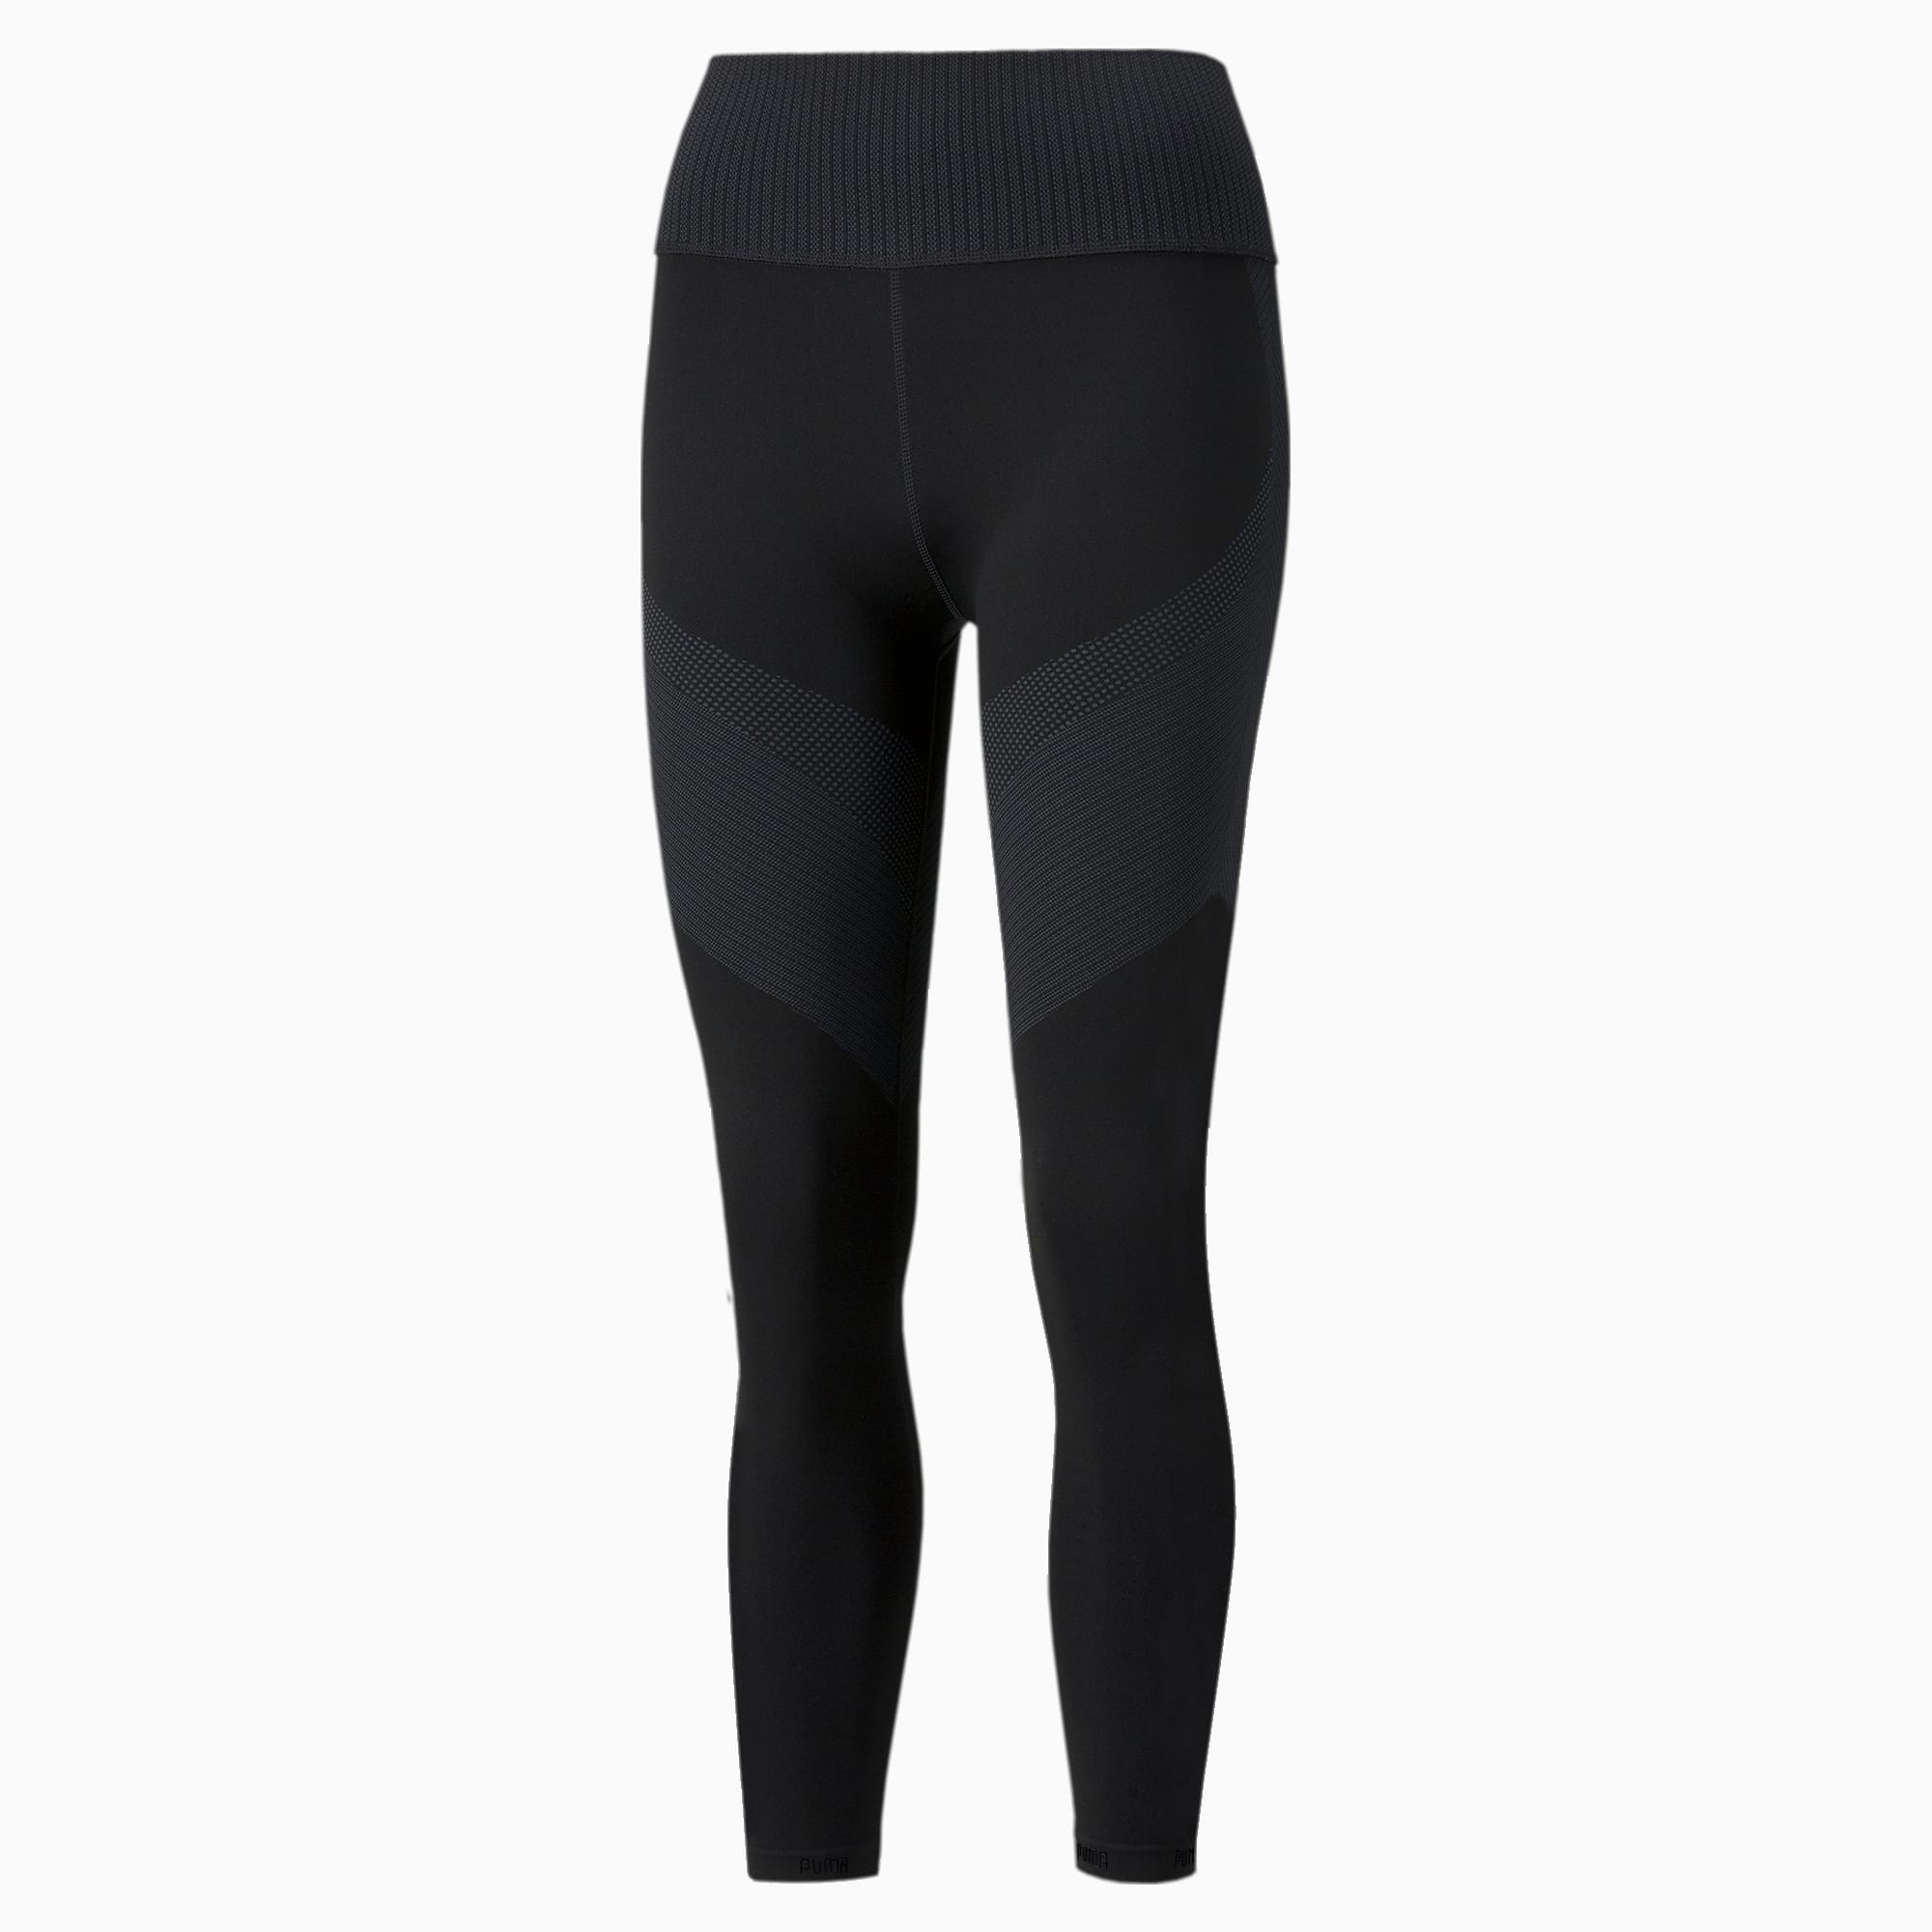 BF Women's 7/8 Length Leggings (Embroidered) - The Black Fit